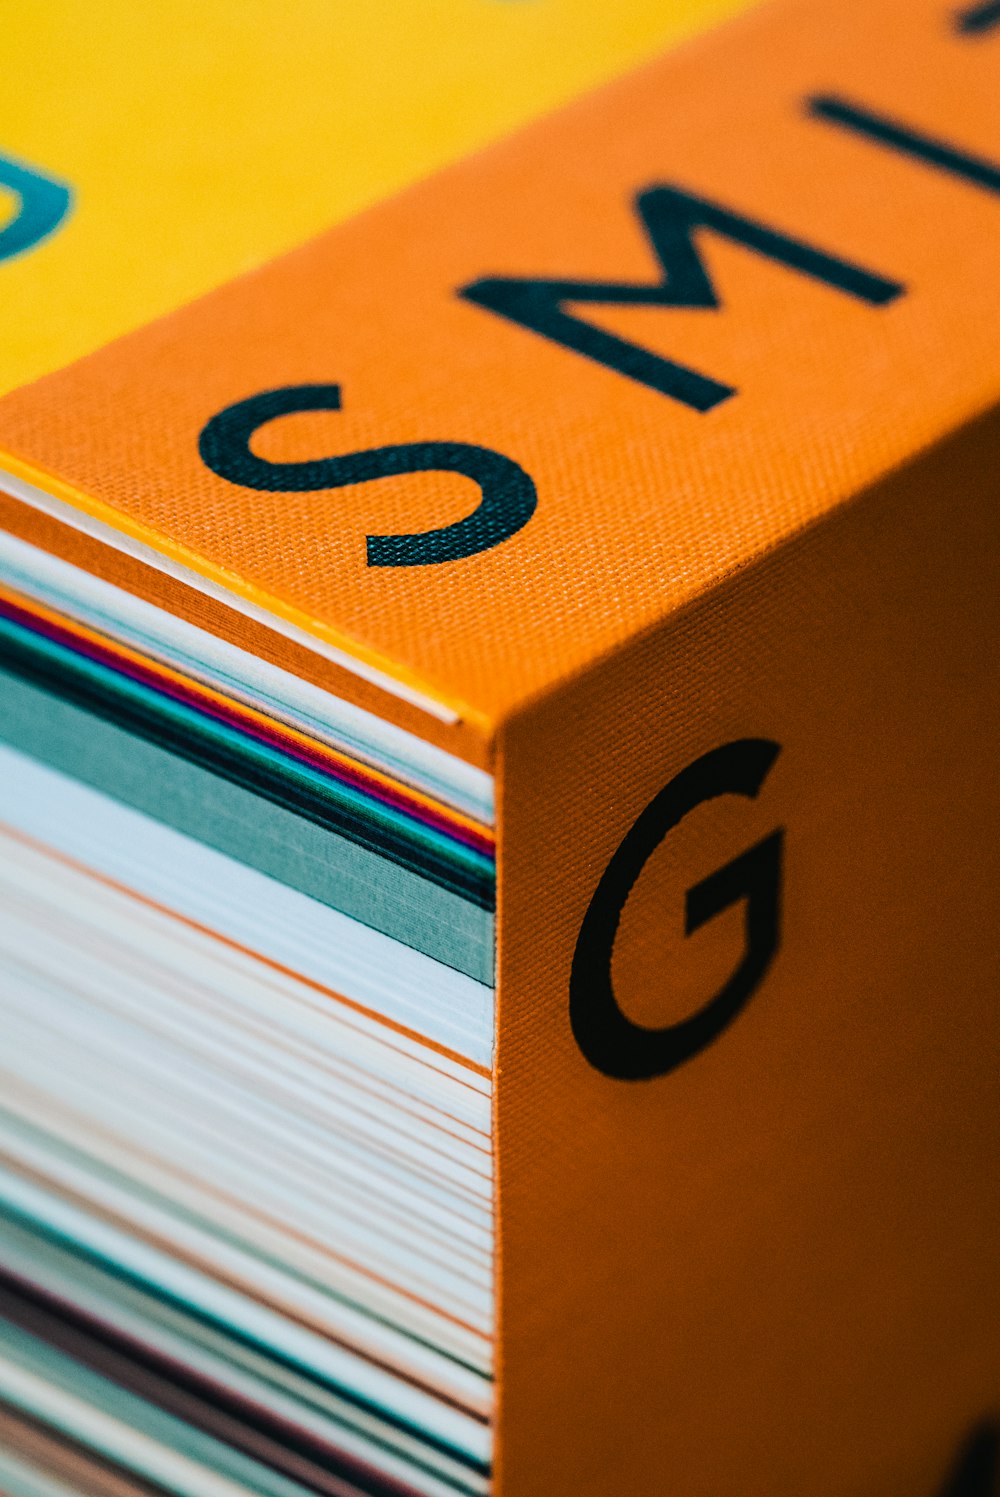 a stack of books with the word g on them